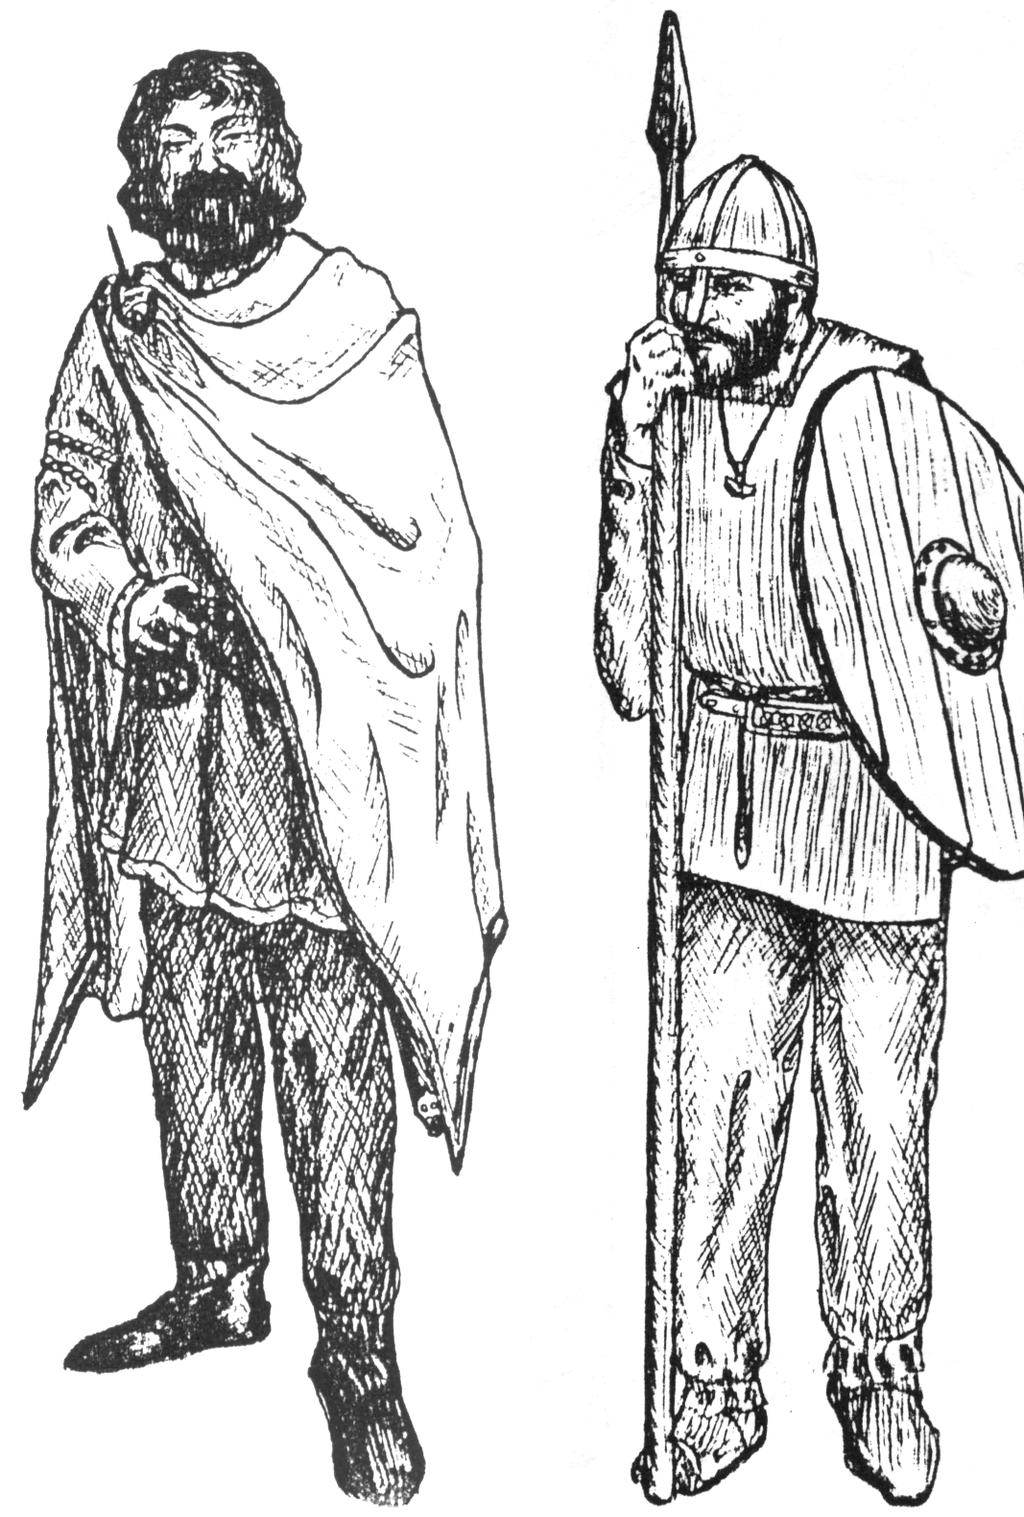 The Vikings were known for their cleanliness and attention to grooming by the Saxons, though st compared to the 21 C this